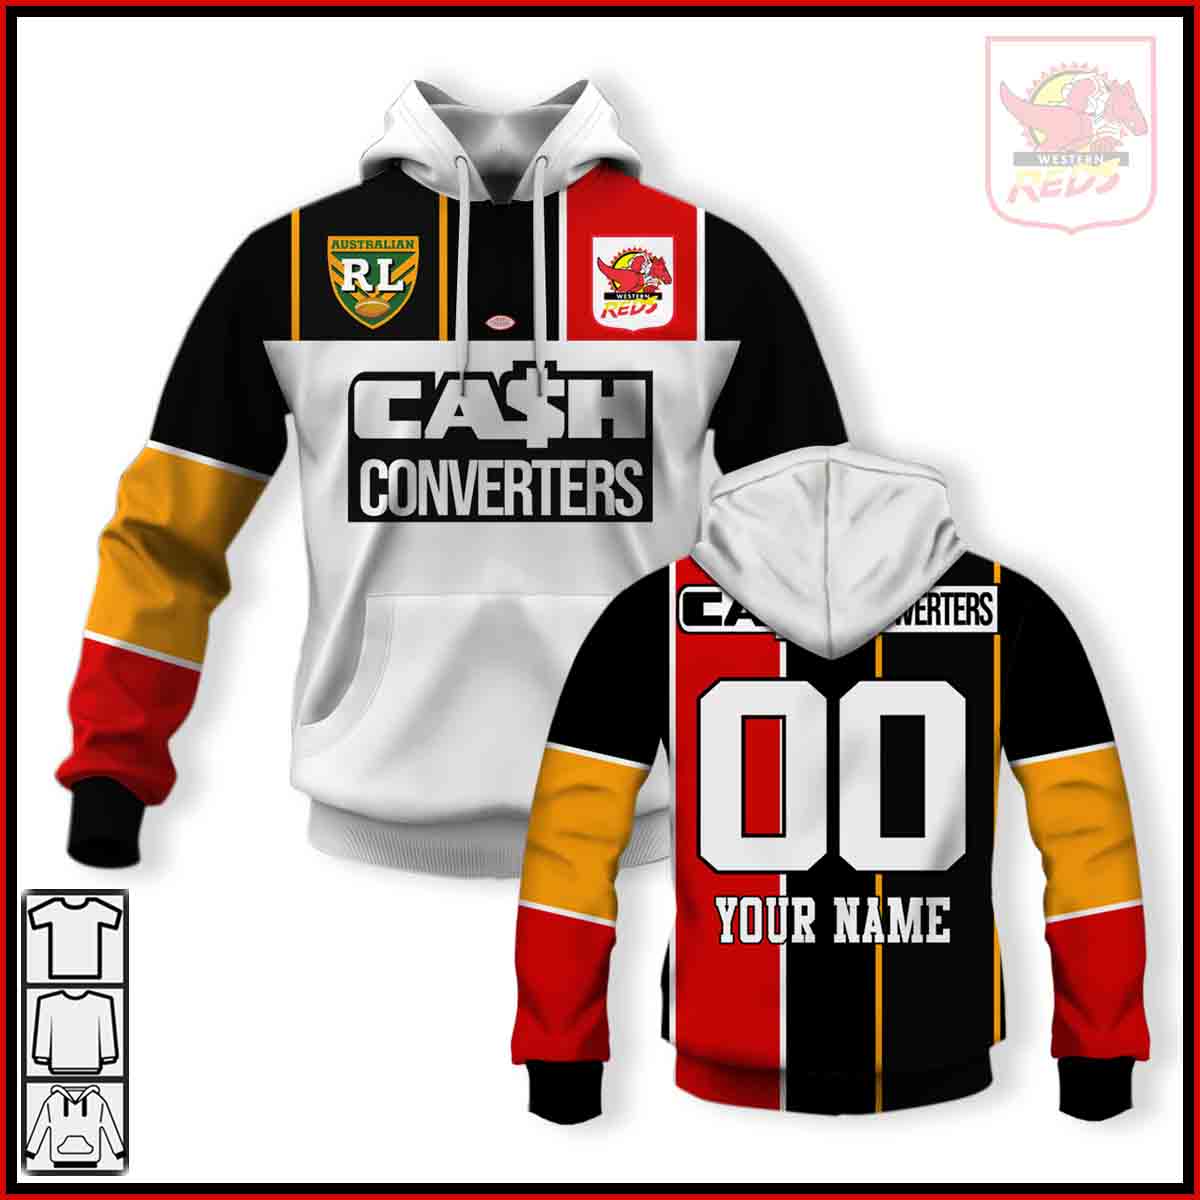 Personalized Western Reds Rugby League Jerseys Hoodies Shirts For Men Women